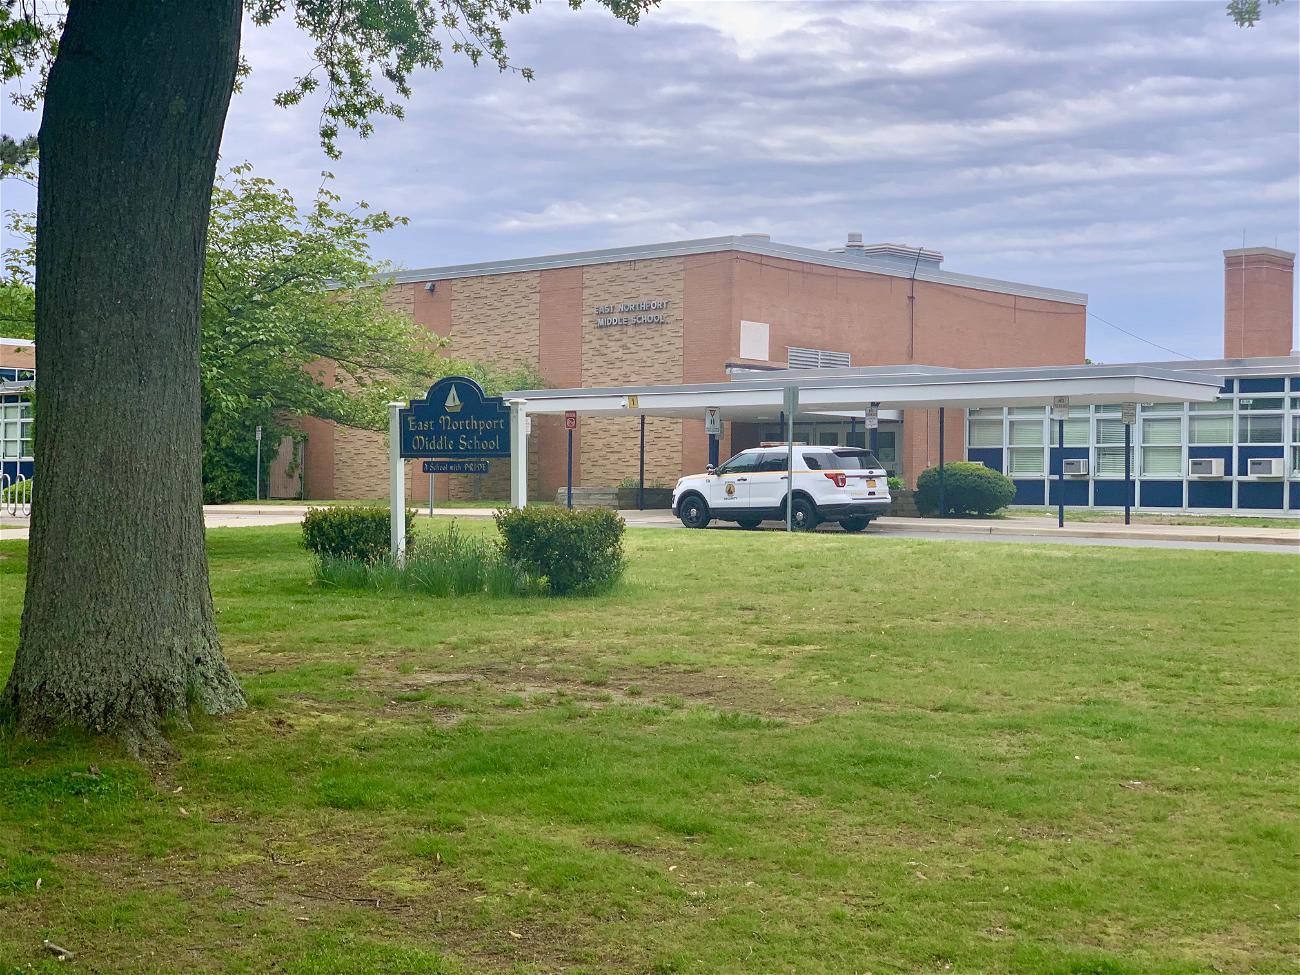 In a recent conversation with the Journal, Superintendent of Schools Dave Moyer discussed an incident involving a threat of mass harm at East Northport Middle School and what can be done to prevent more incidents in the future. 